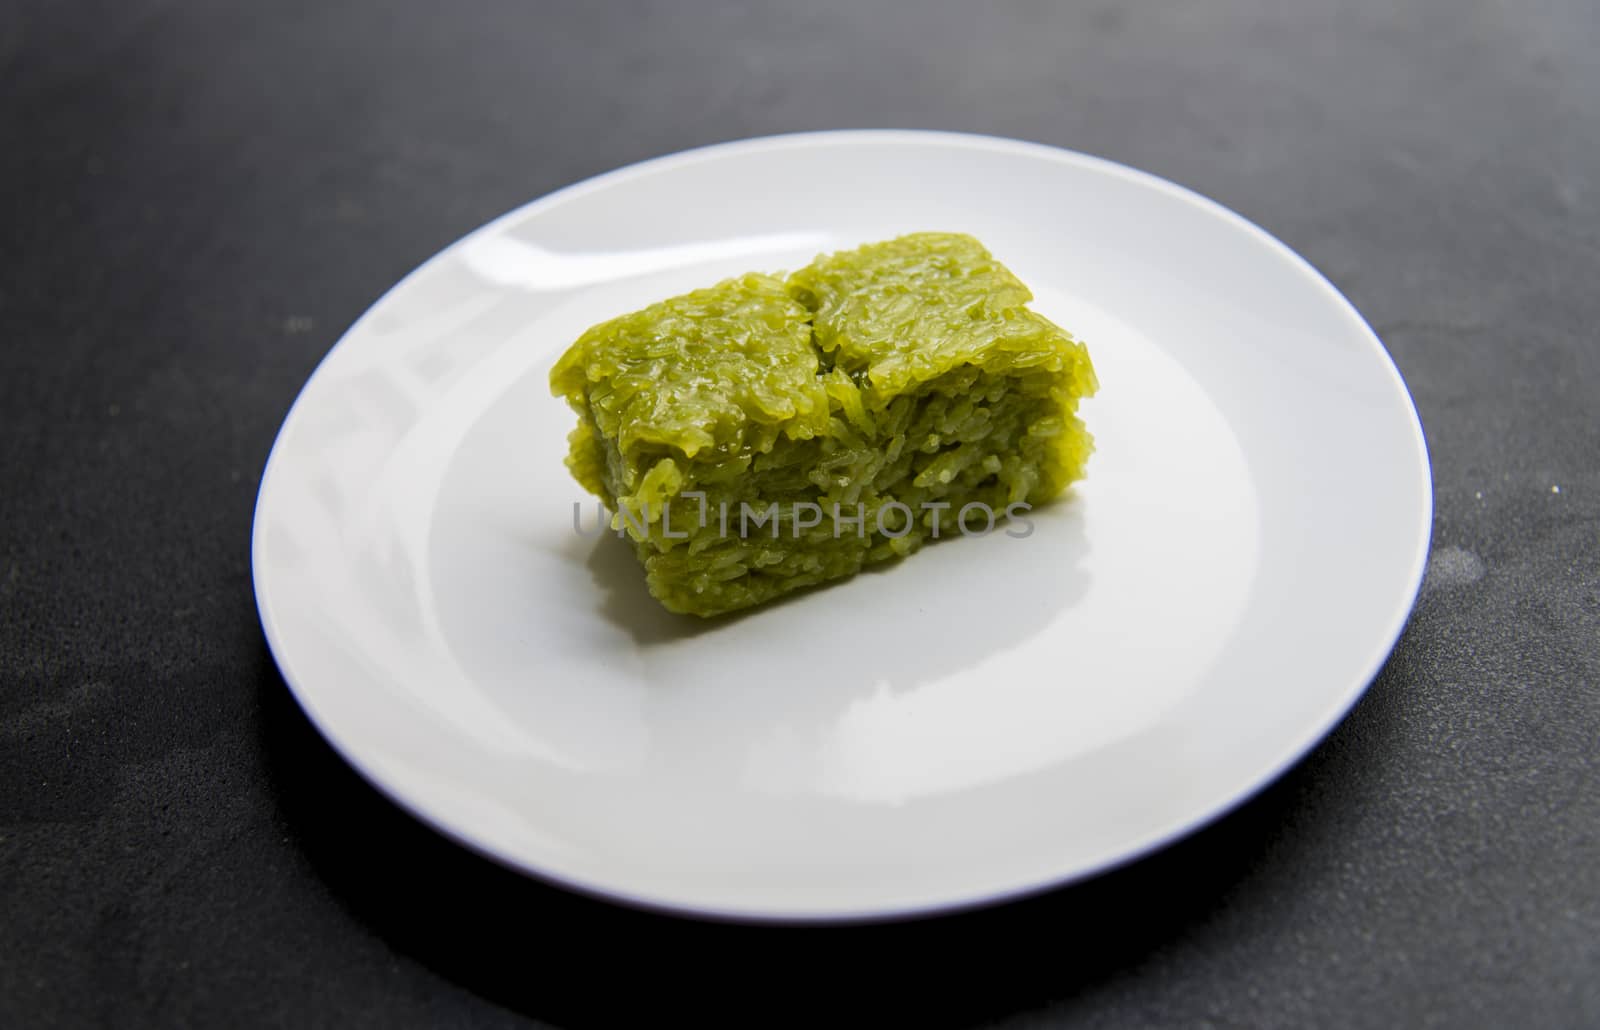 Glutinous rice cooked with sugar which pandan leaves flavor1